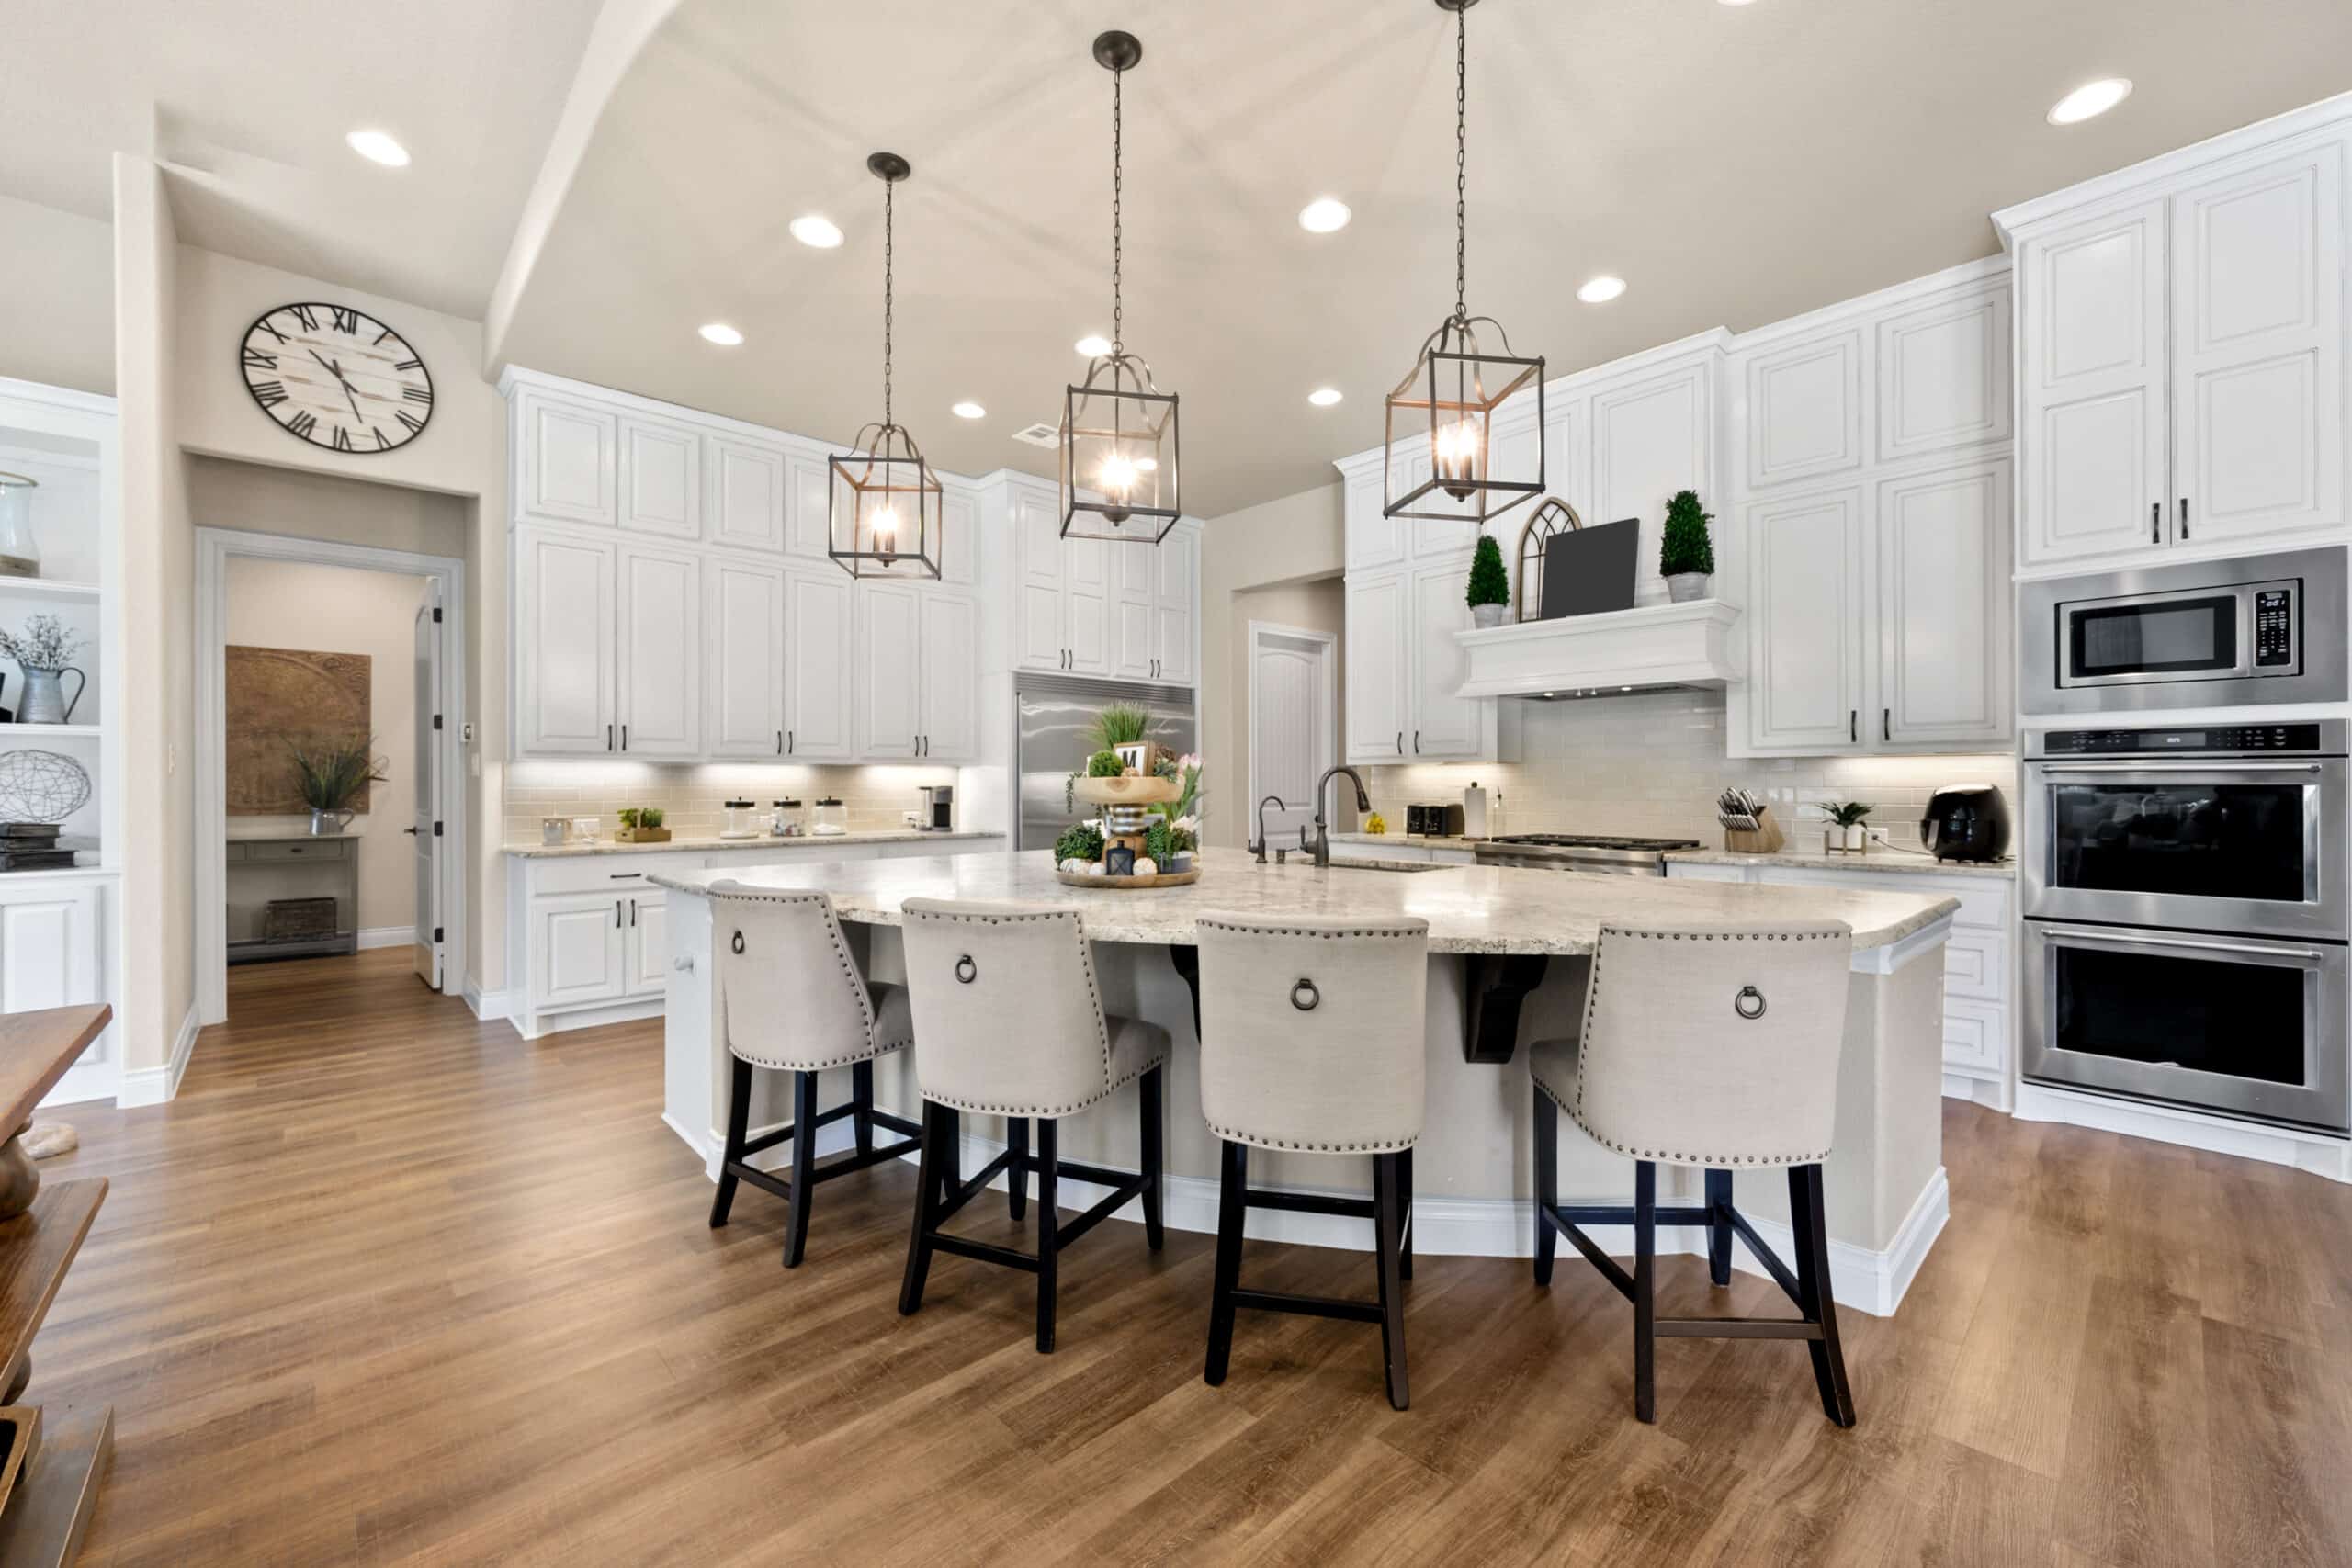 Spacious white kitchen style with curved kitchen island, and transitional kitchen cabinets